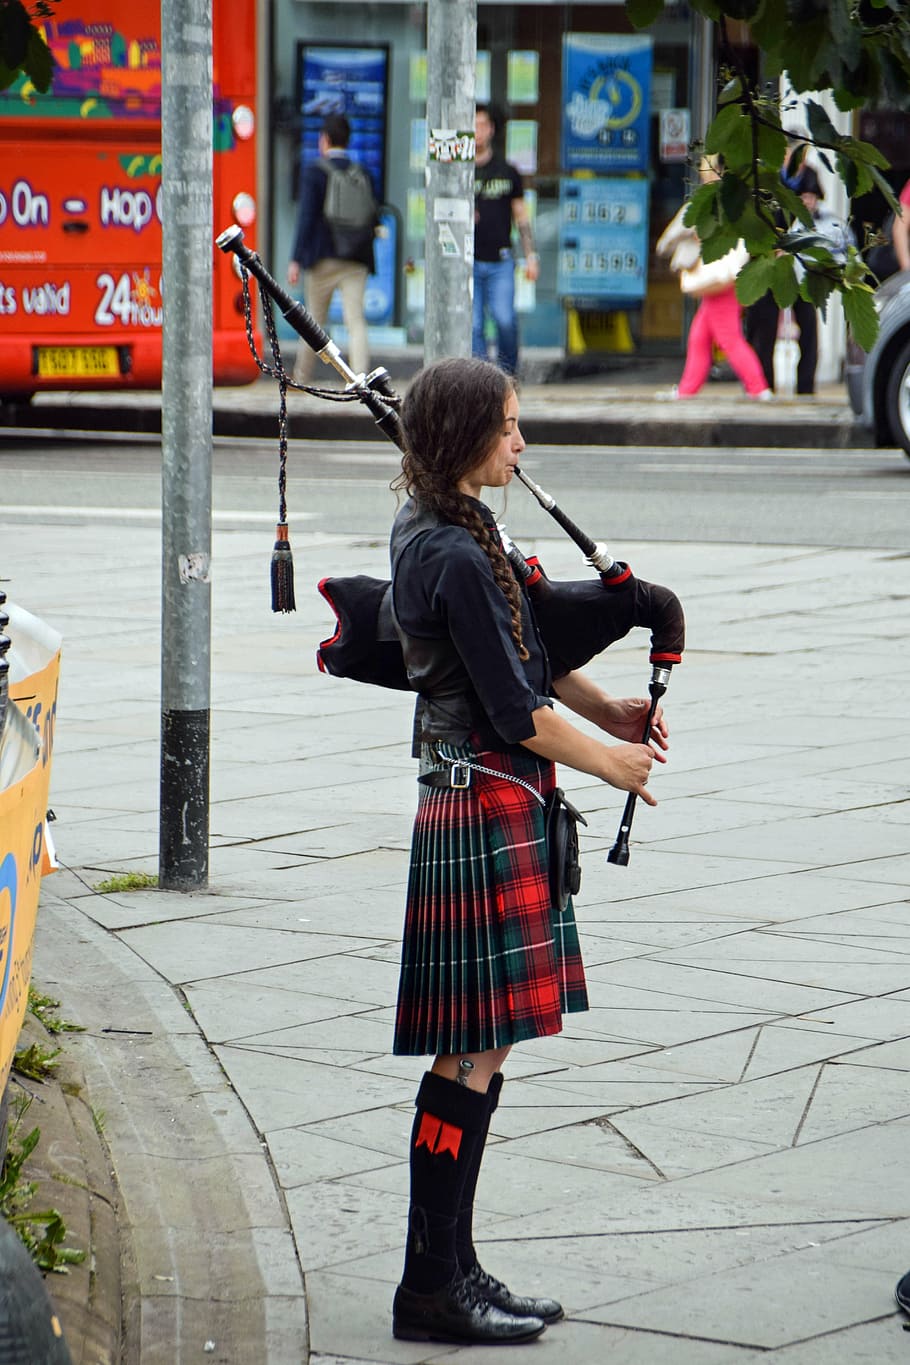 woman playing wind instrument, scotland, england, bagpipes, bagpipe spielerin, HD wallpaper